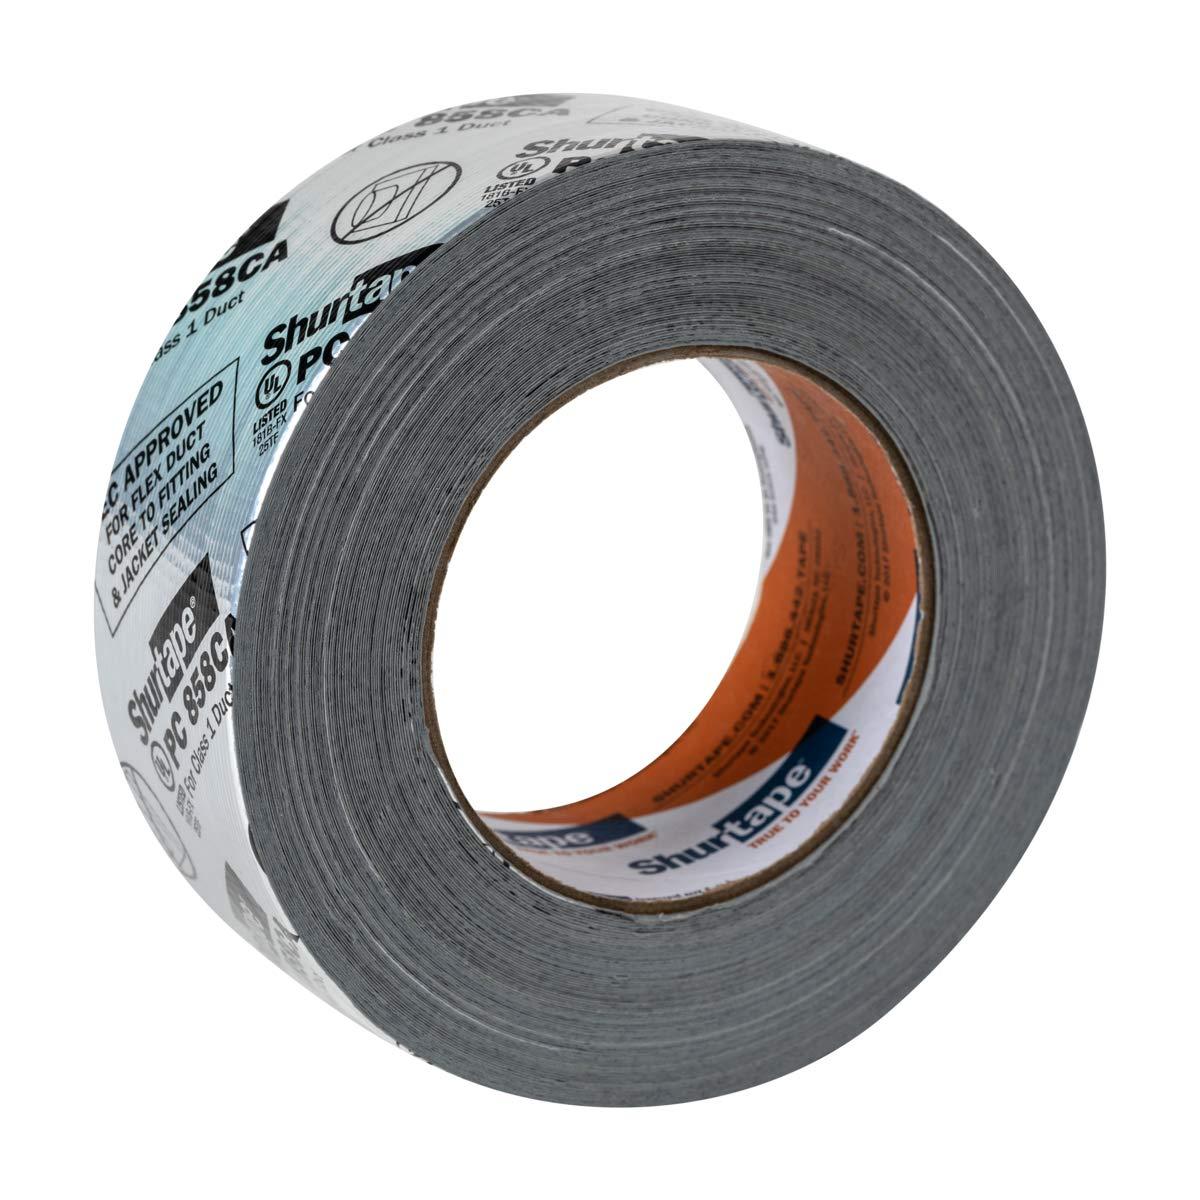 Duck Brand HVAC Duct Sealing Tape, Silver, 1.88 Inches x 30 Yards, 1 Roll  (1404523) 1.88 in. x 30 yd.